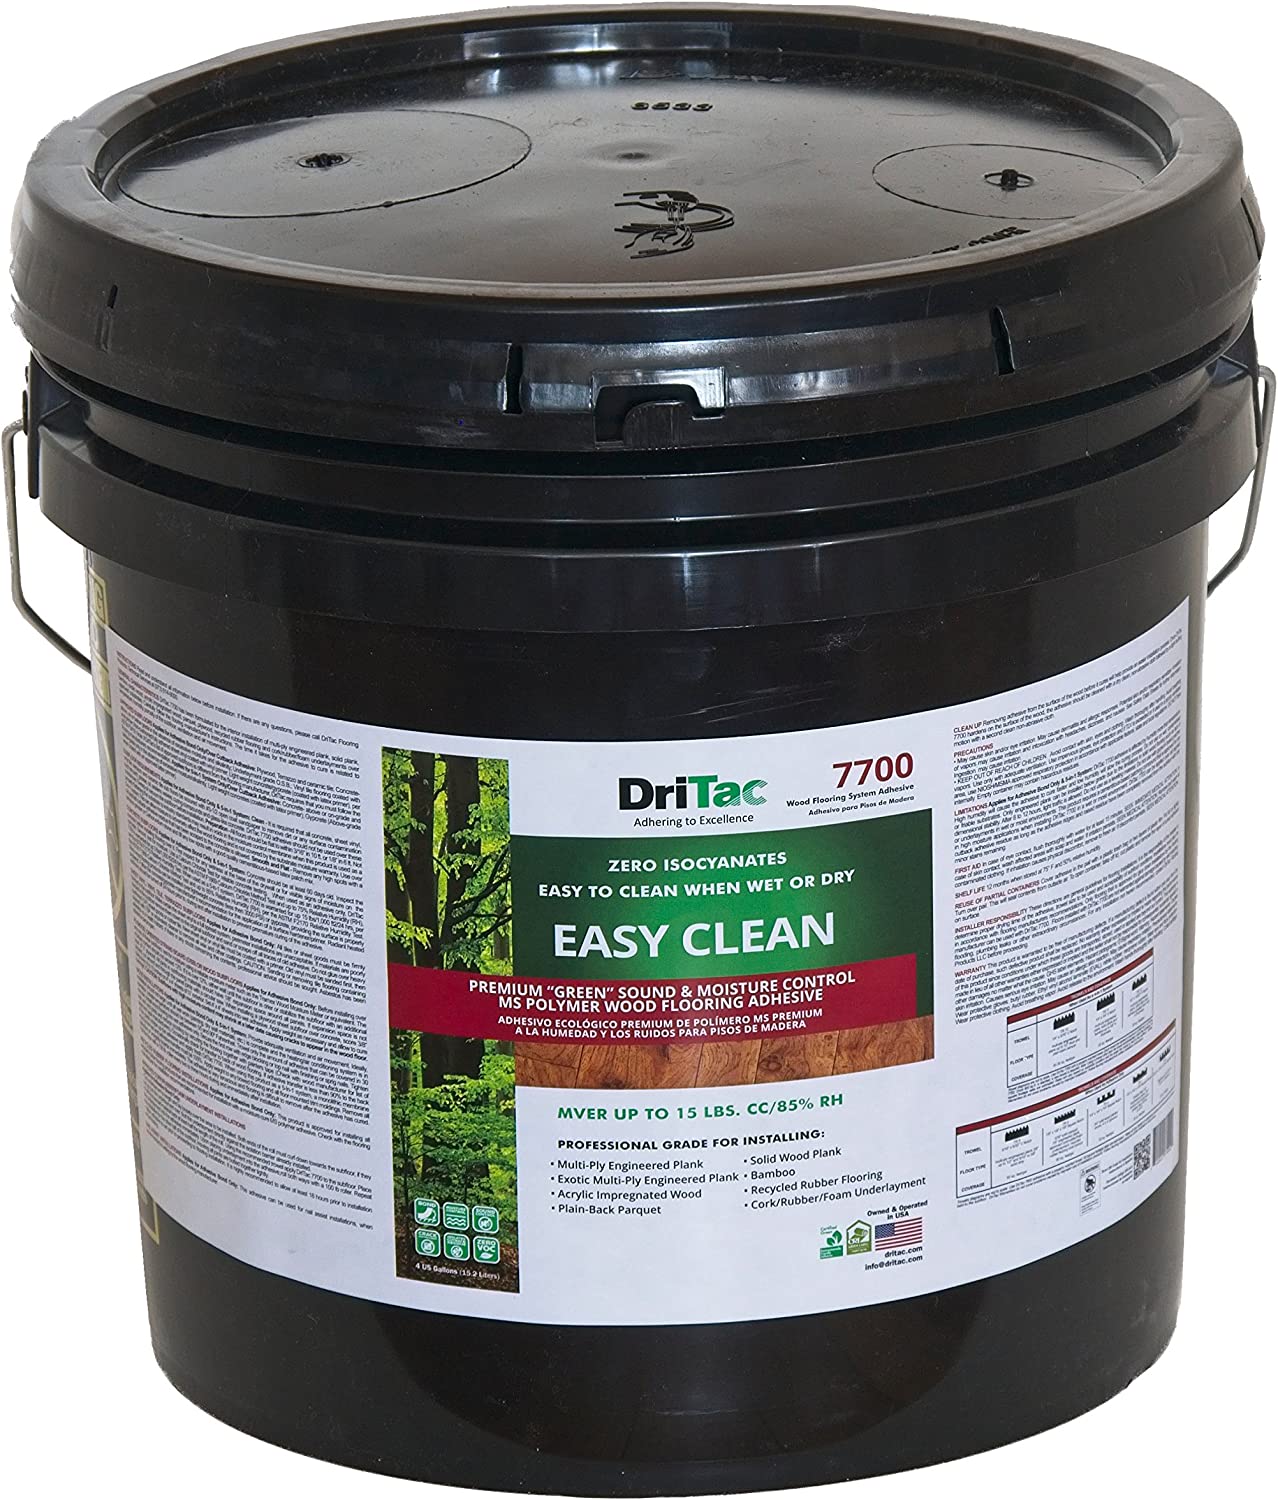 DriTac 7700 Easy Clean - Wood Flooring Adhesive with Sound/Moisture Control - 4-Gallon